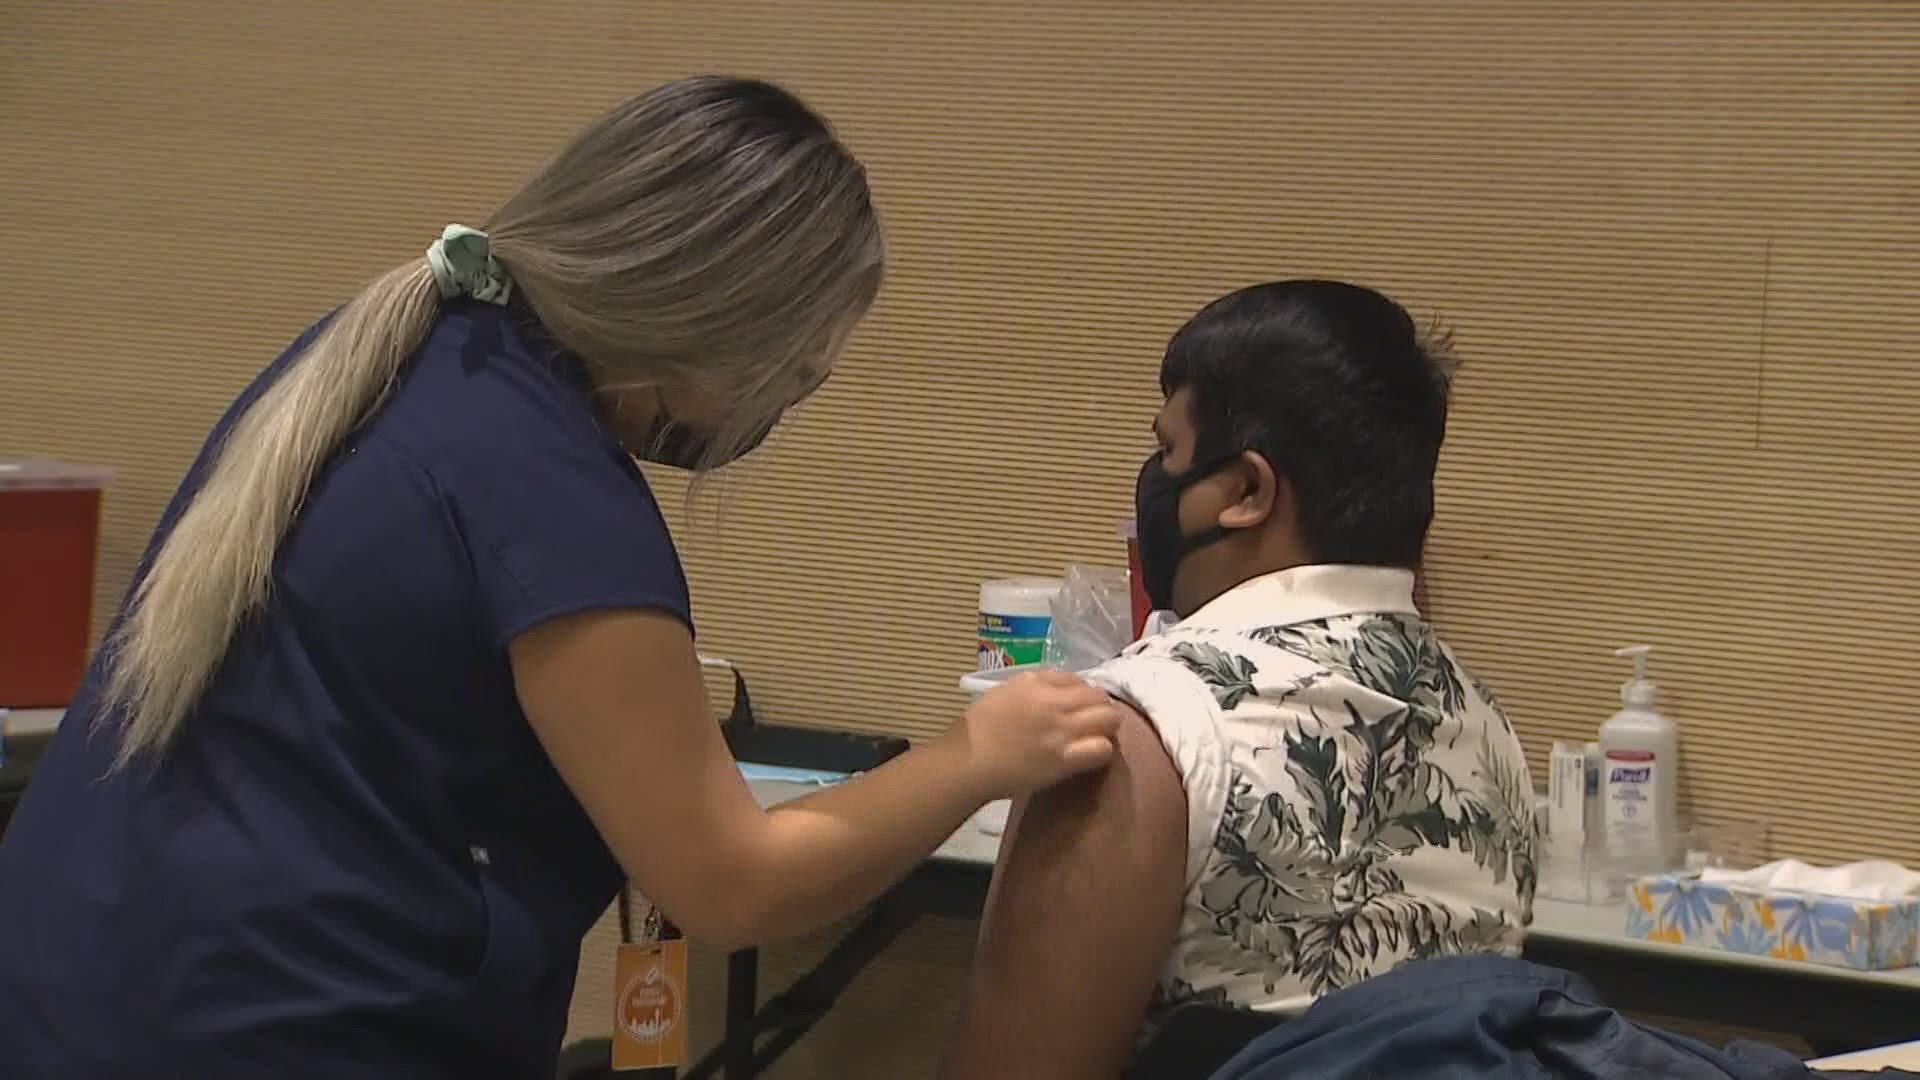 Washington's "Shot of a Lifetime" lottery begins Tuesday. Prizes include cash, college tuition, airline tickets and more. Anyone vaccinated in Washington is eligible